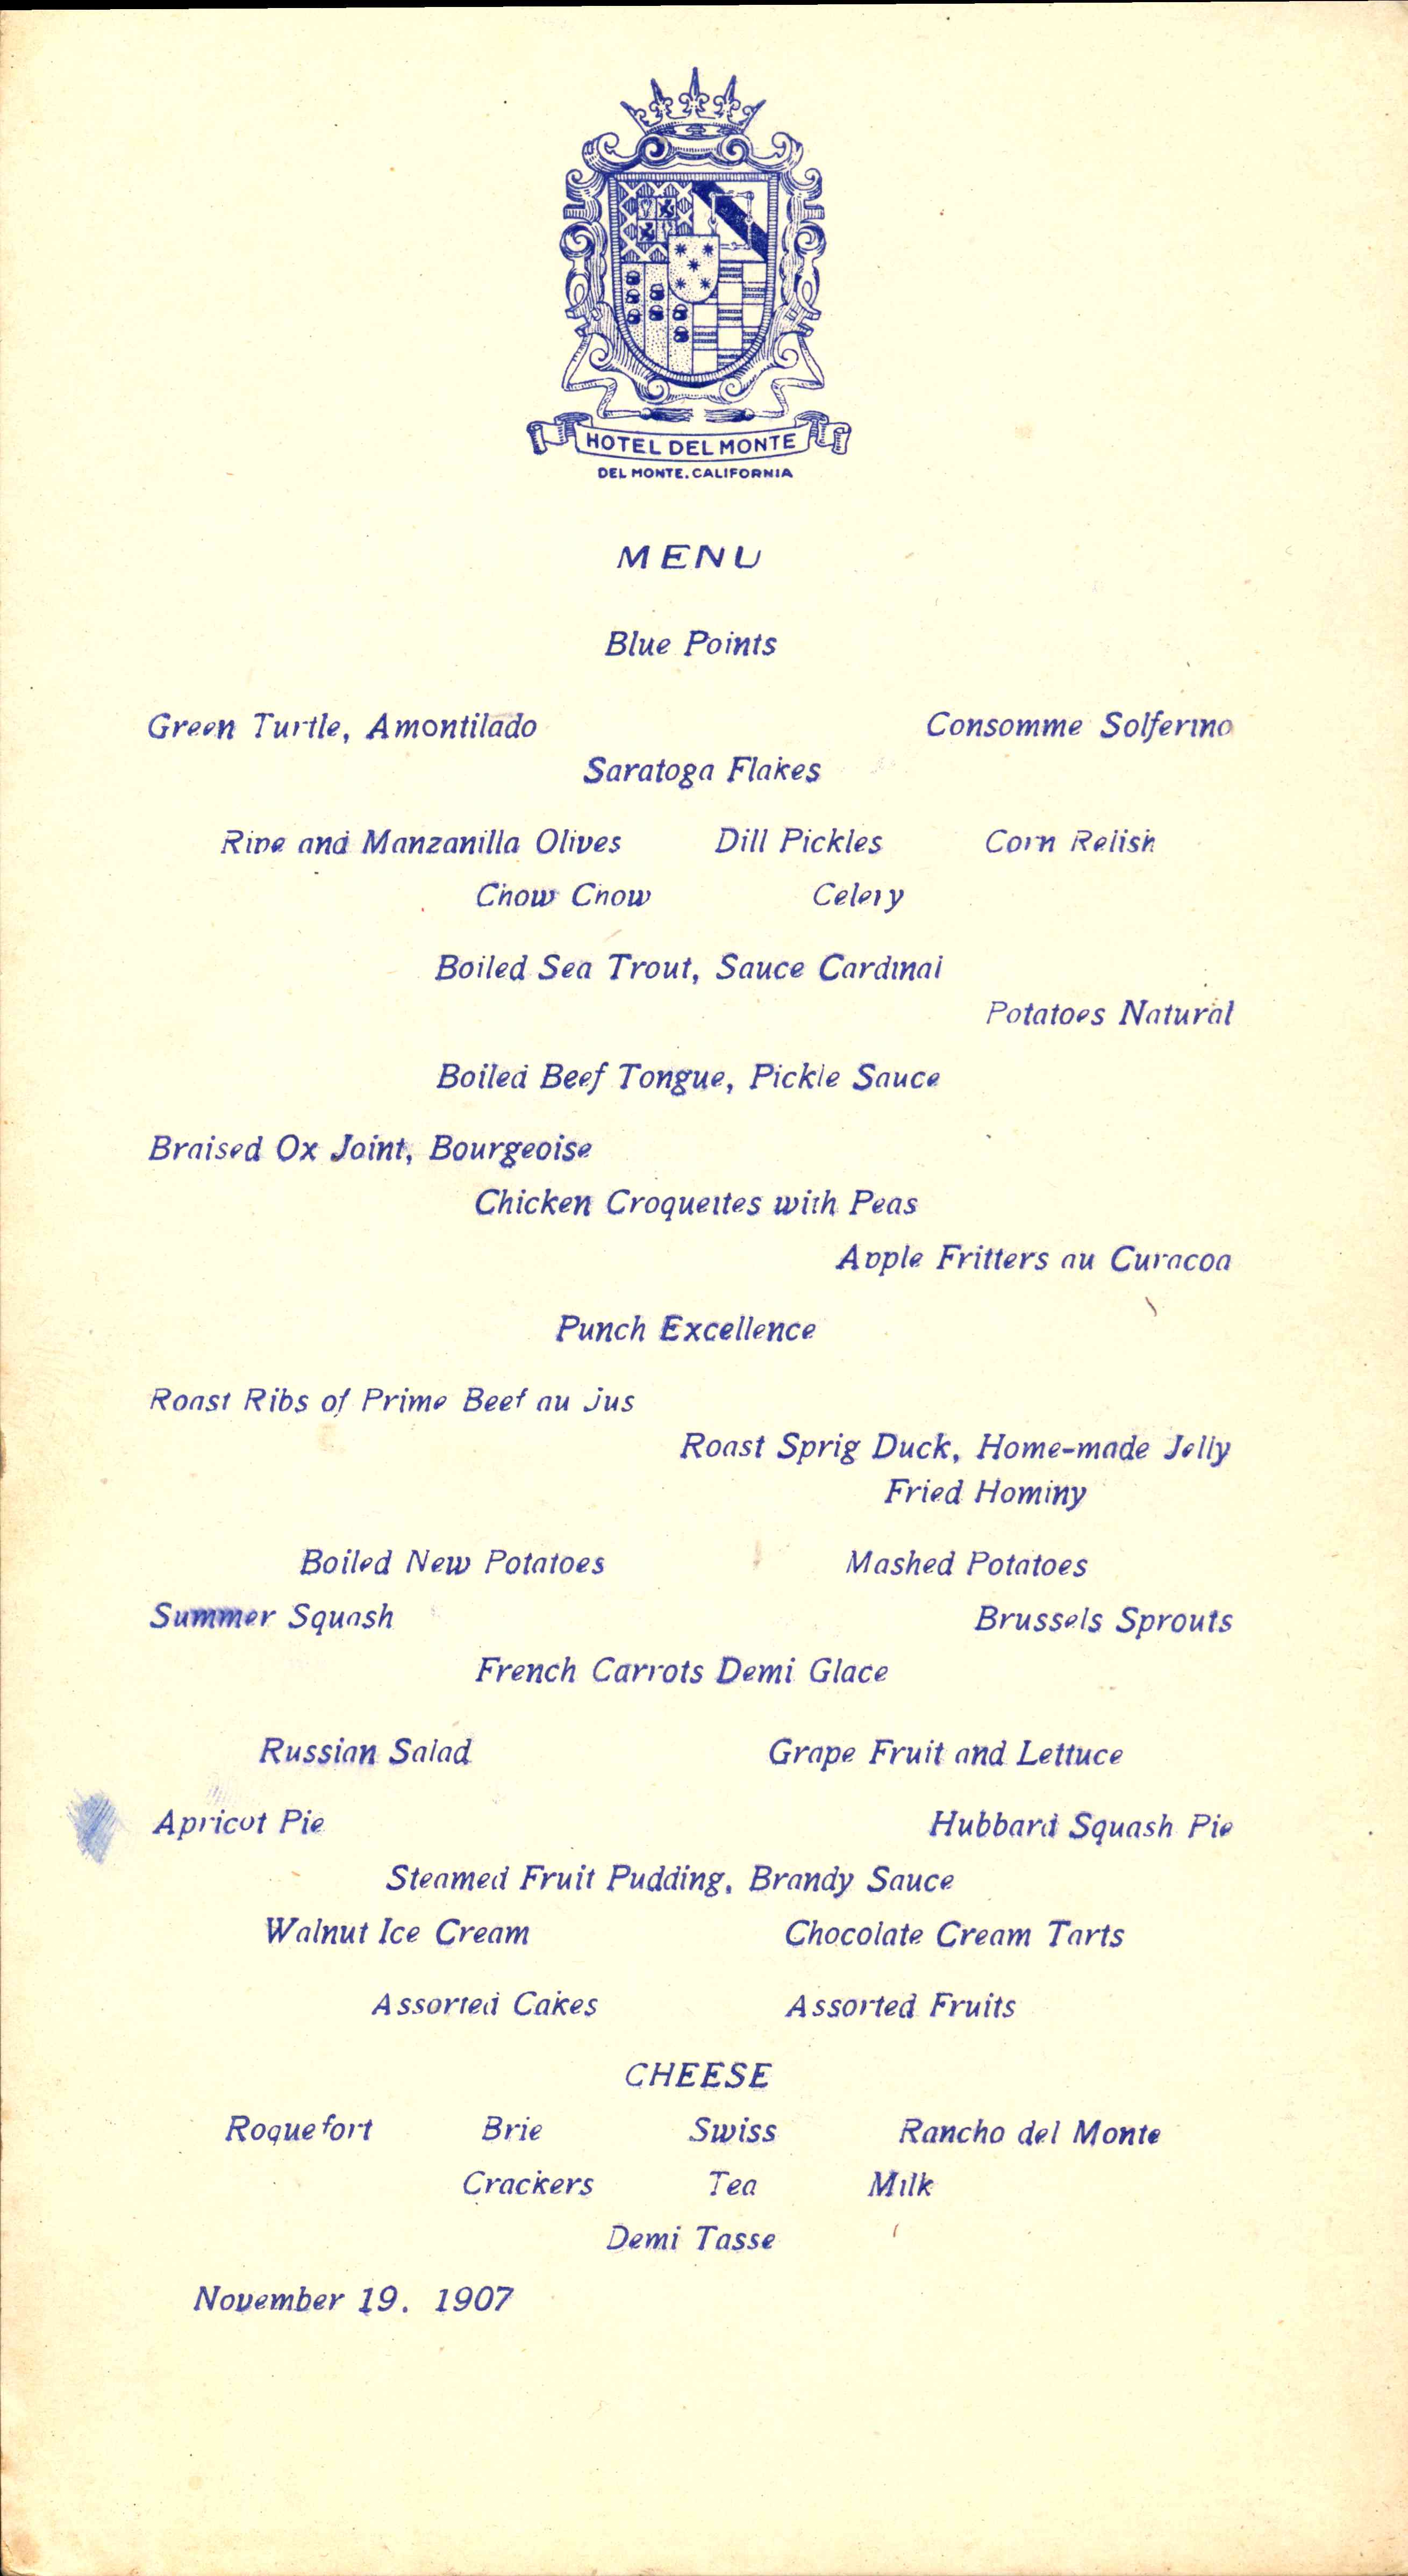 A picture of the hotel crest at the top of the menu